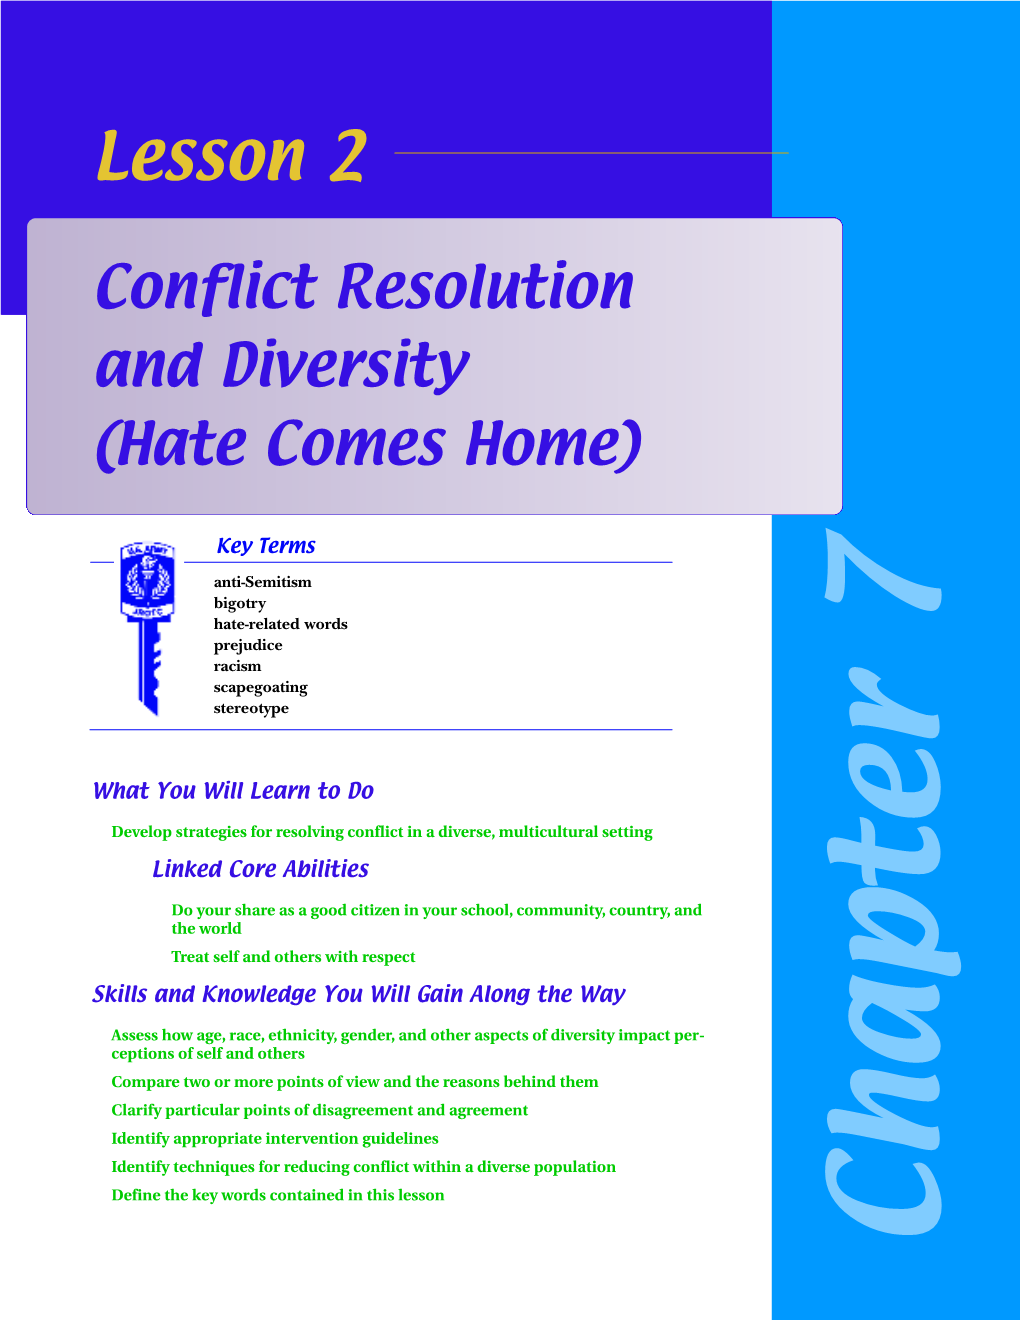 Conflict Resolution and Diversity (Hate Comes Home)